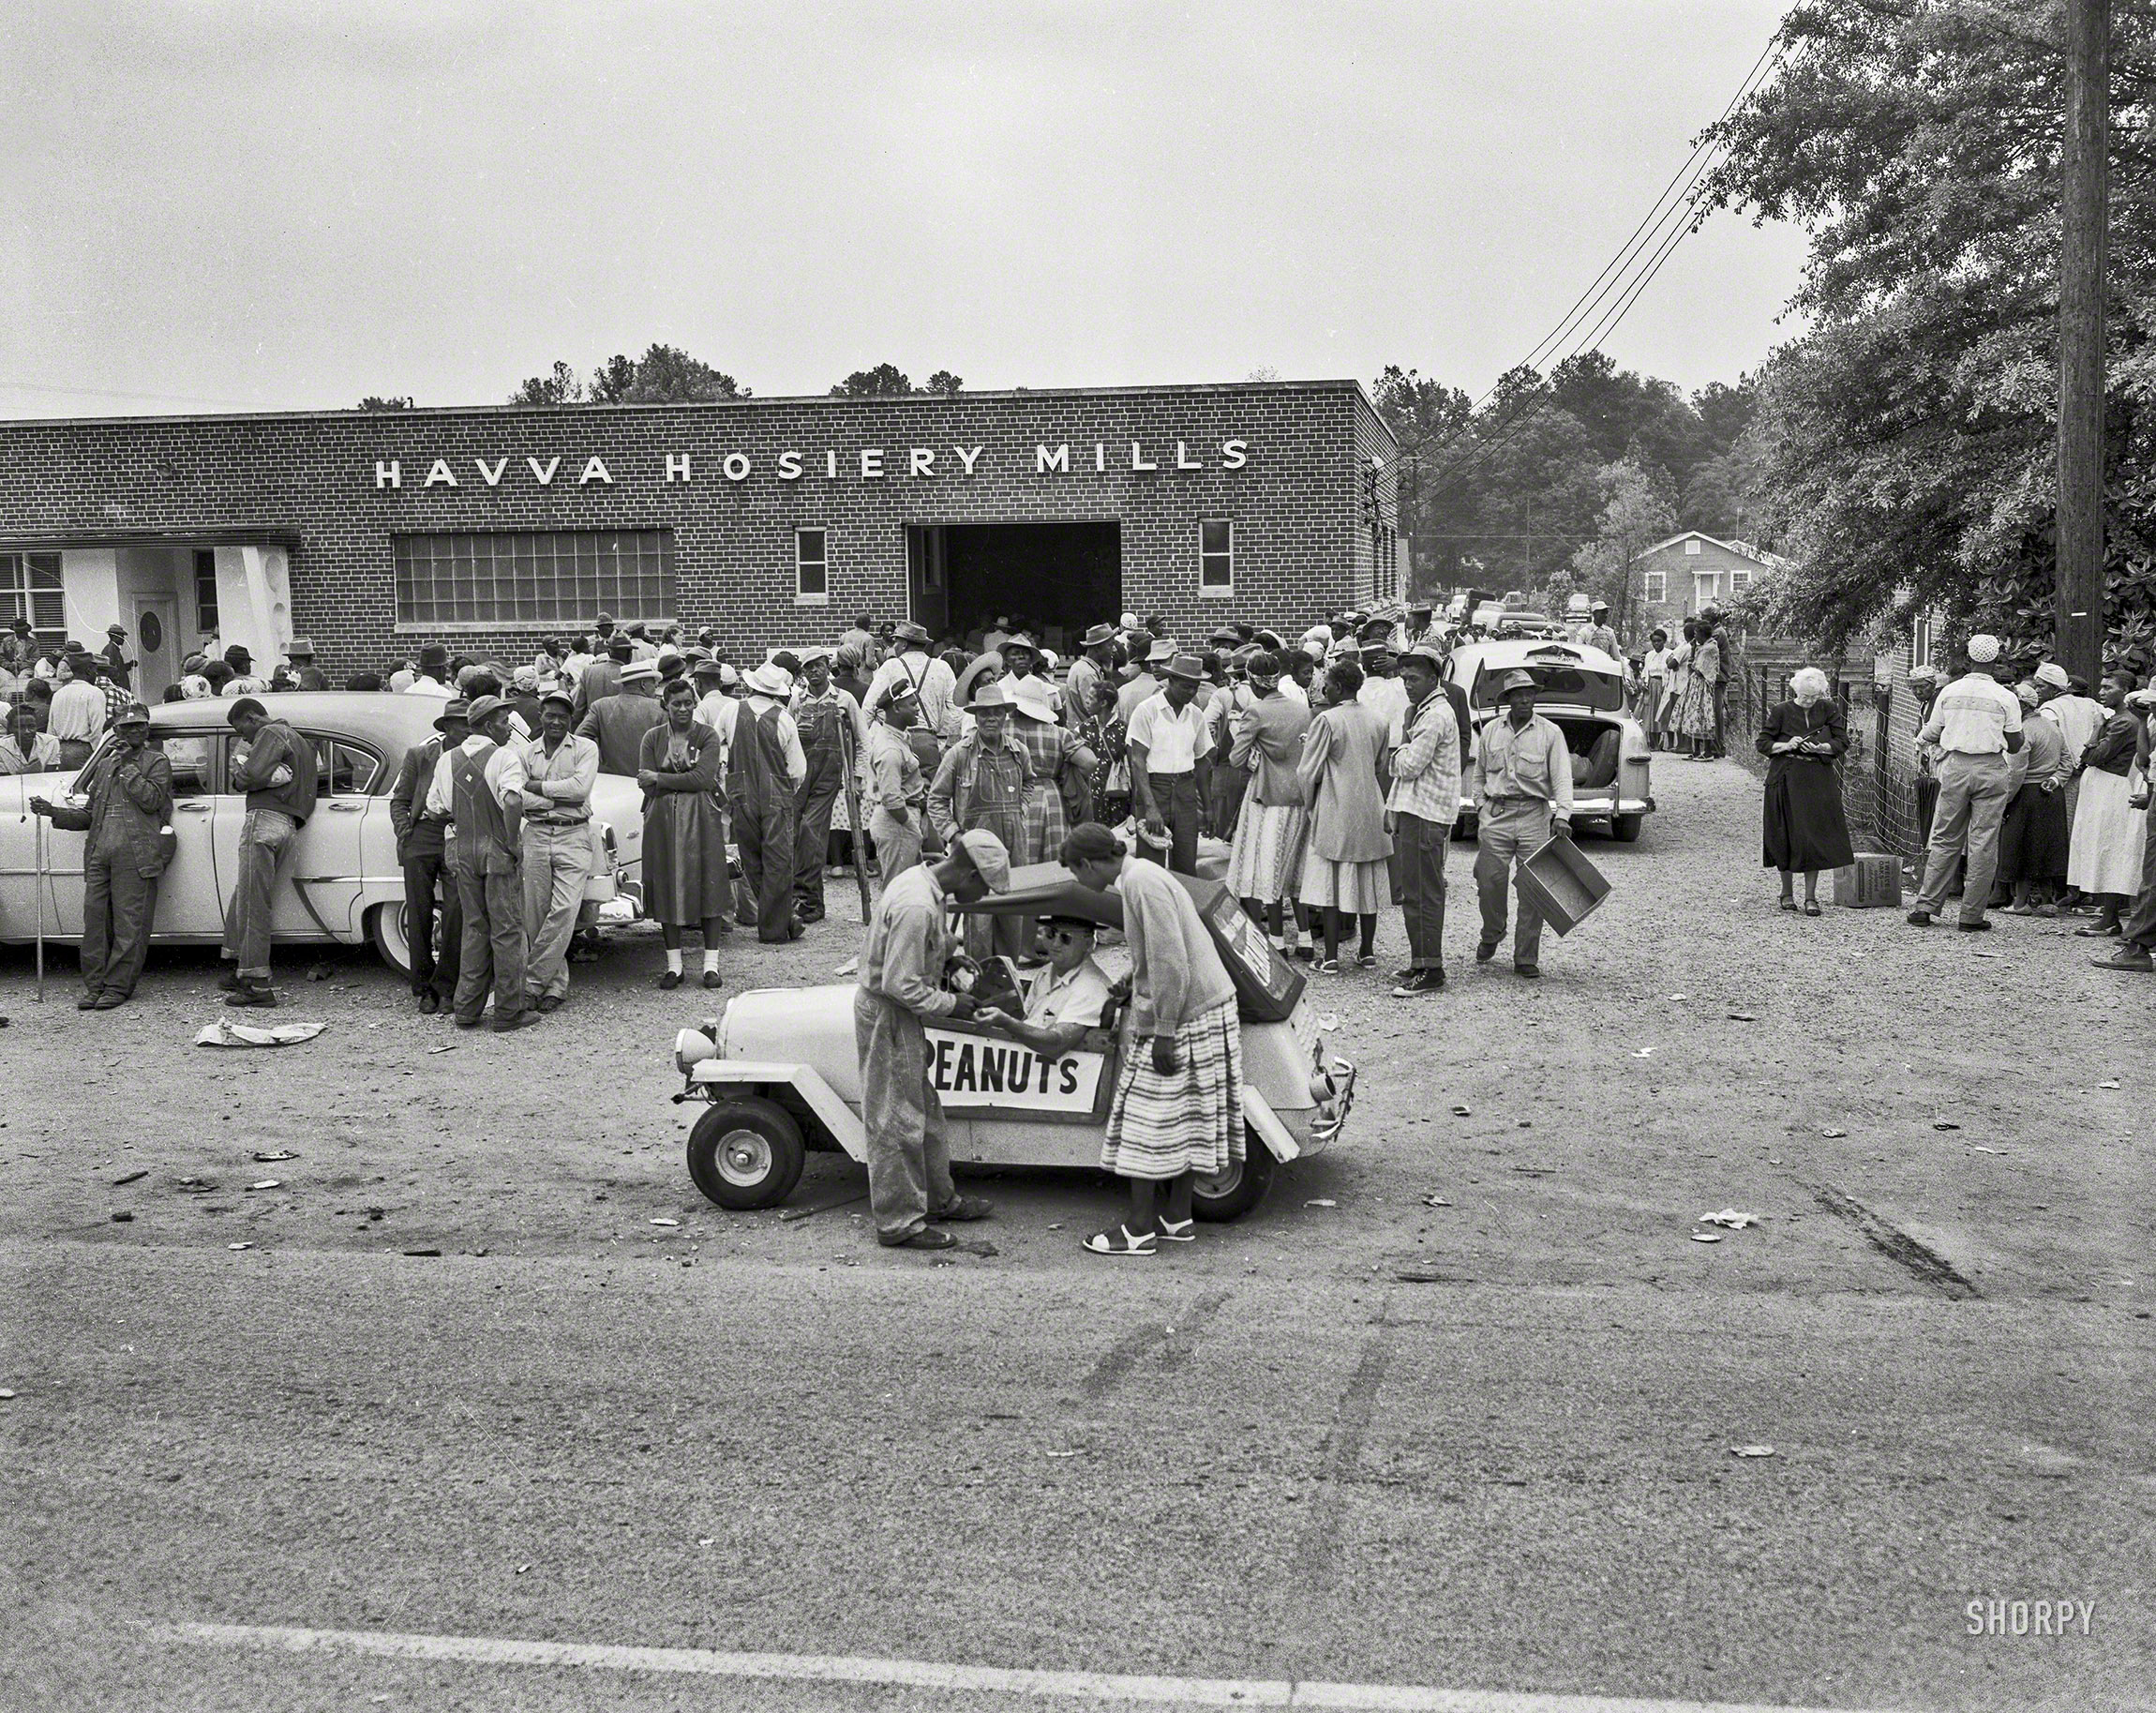 Chicagoland circa 1956. "Peanut man at Havva Hosiery Mills." Piloting (pedaling?) a one-cylinder King Midget. 4x5 inch acetate negative. View full size.